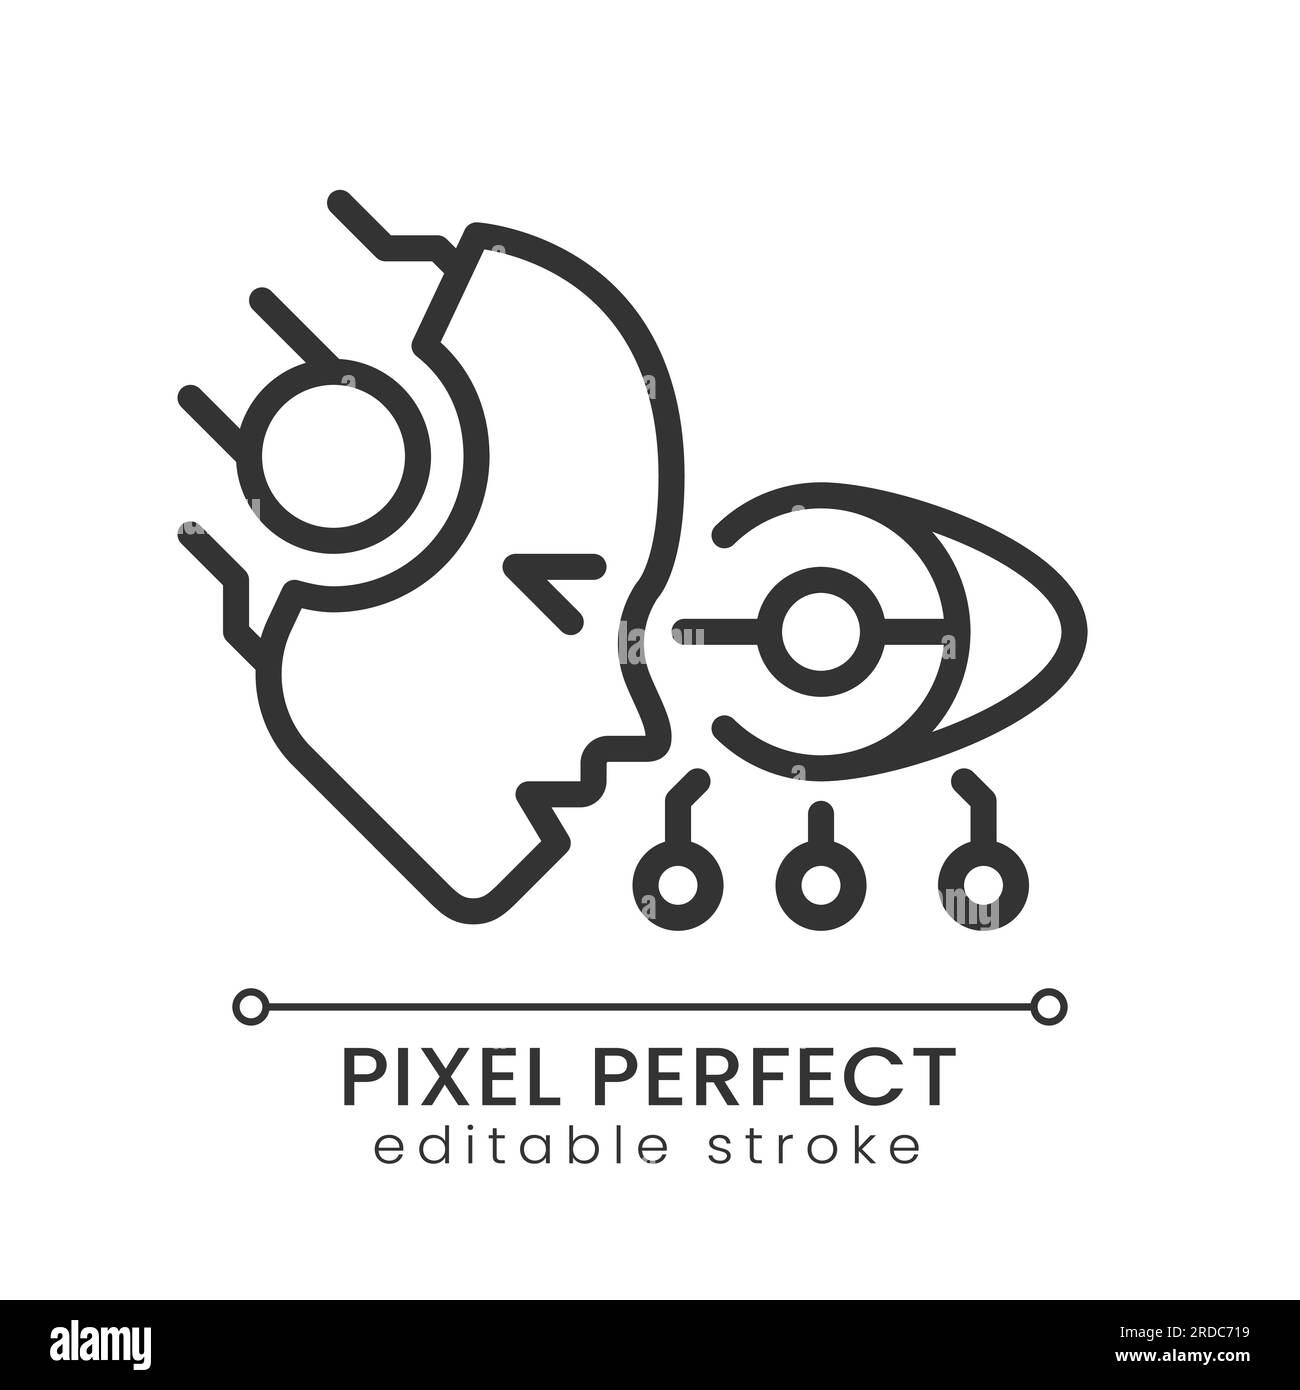 AI see pixel perfect linear icon Stock Vector